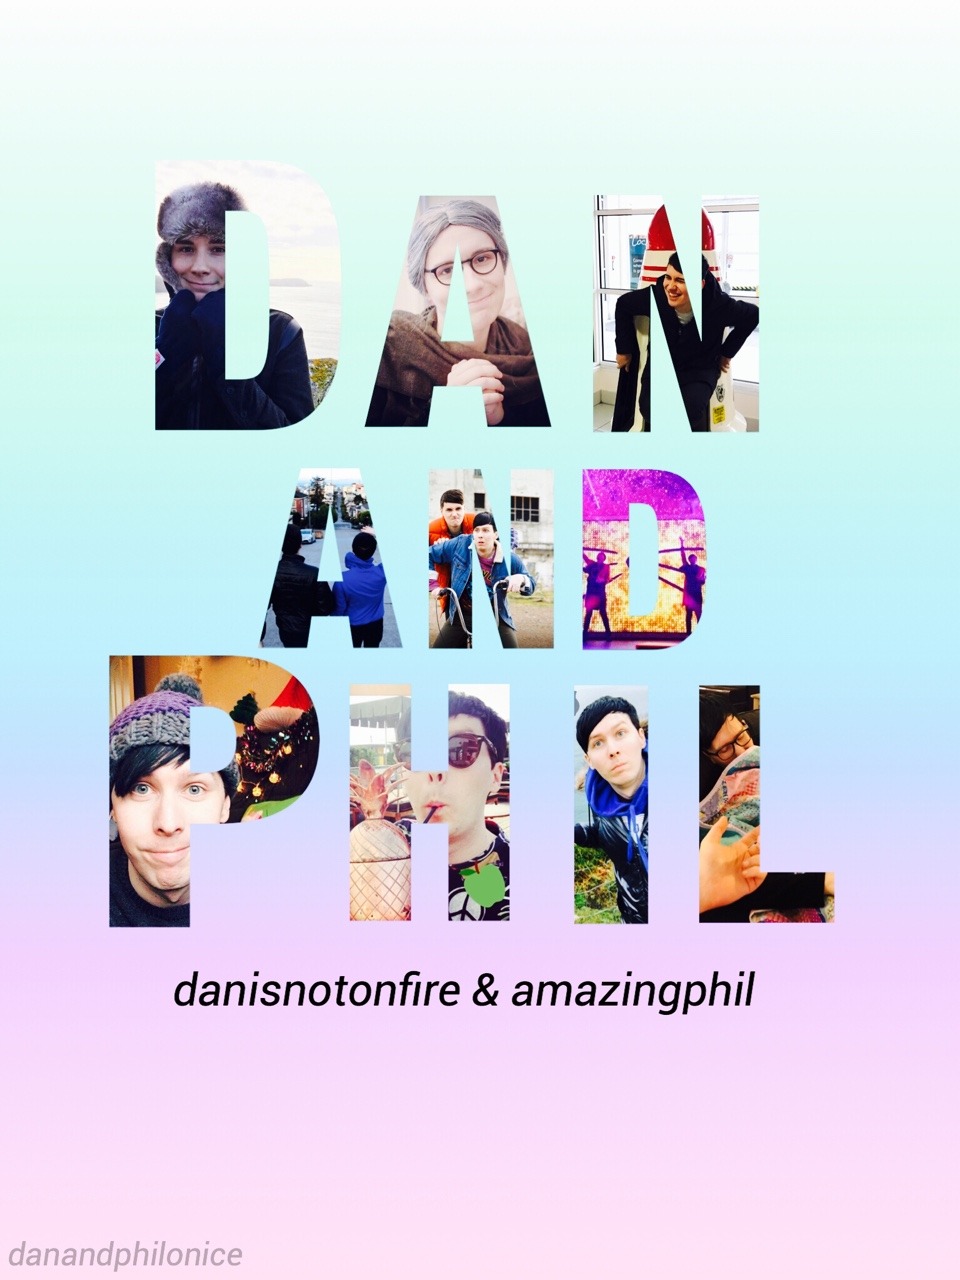 Just Got An Ipad, So That Automatically Means I Need - Dan And Phil Ipad - HD Wallpaper 